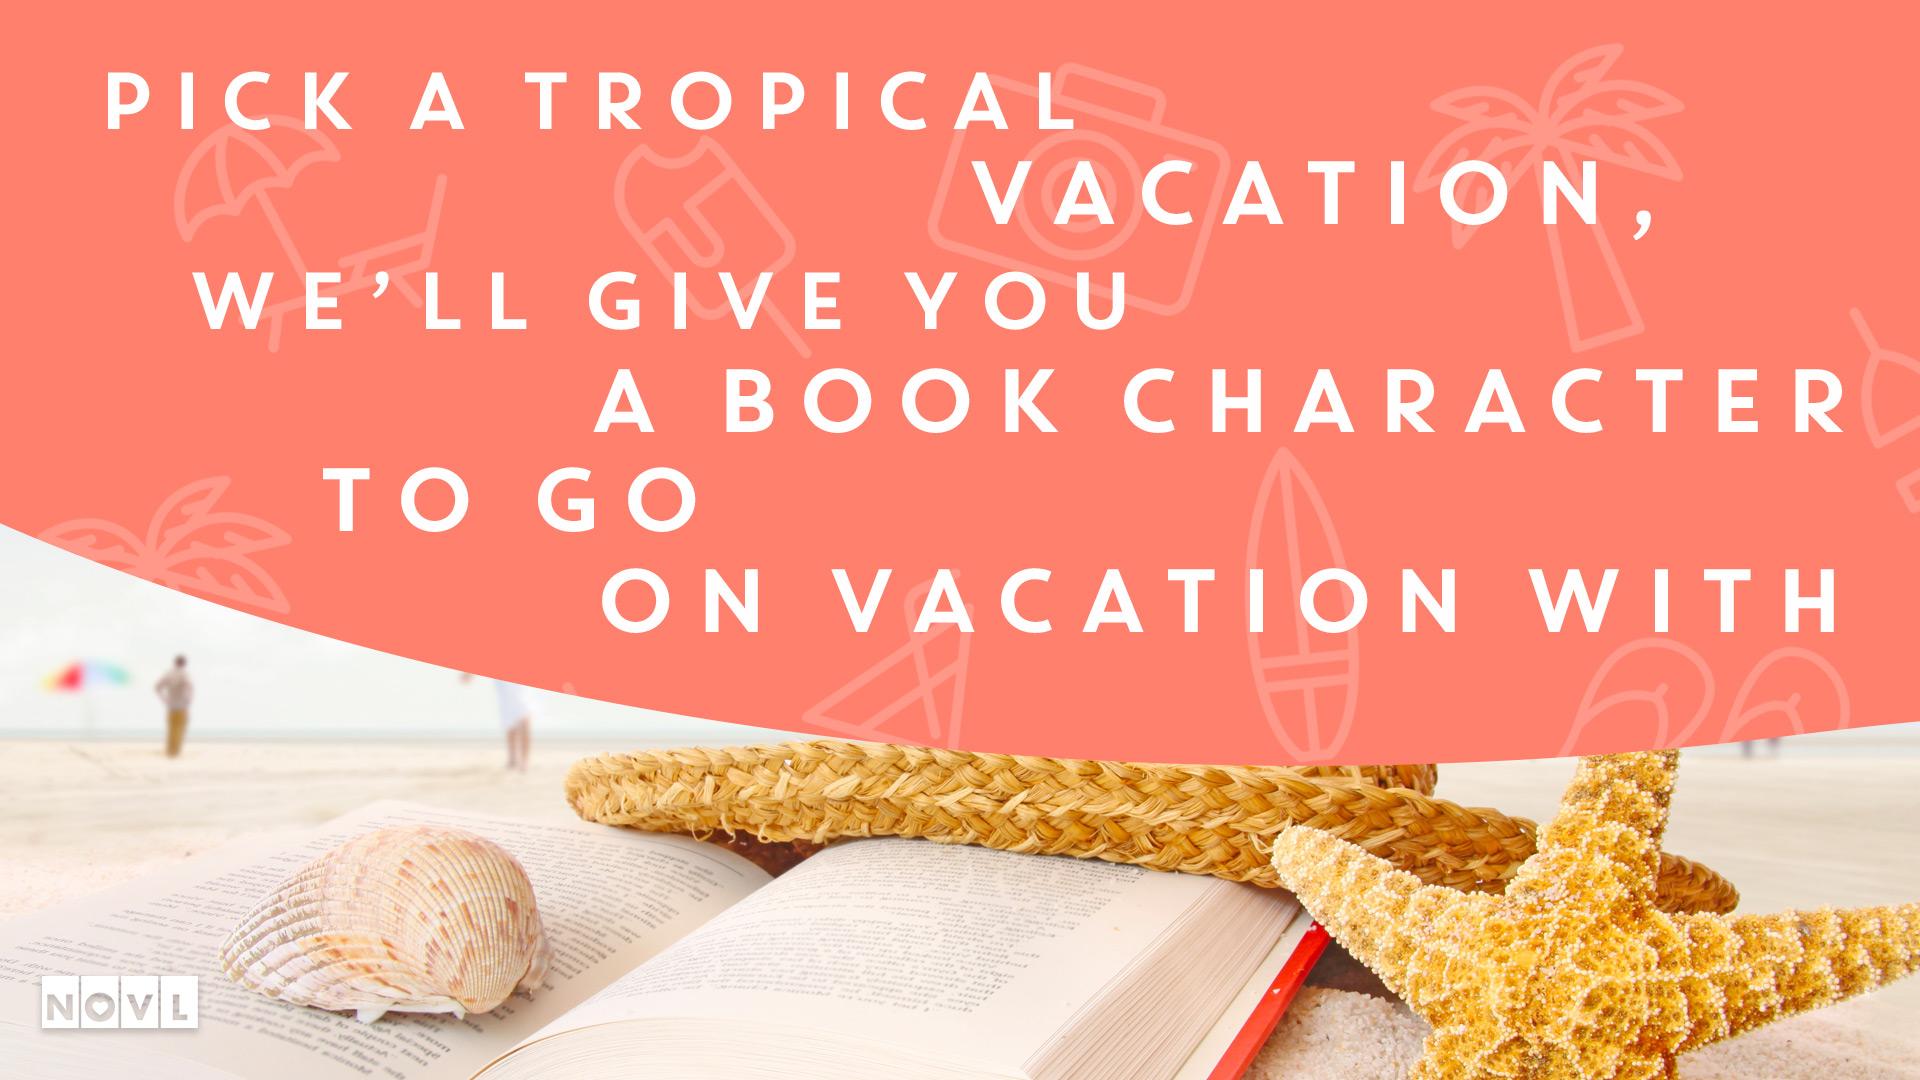 The NOVL Blog, Featured Image for Article: Pick a tropical vacation, and we'll give you a book character to go on vacation with